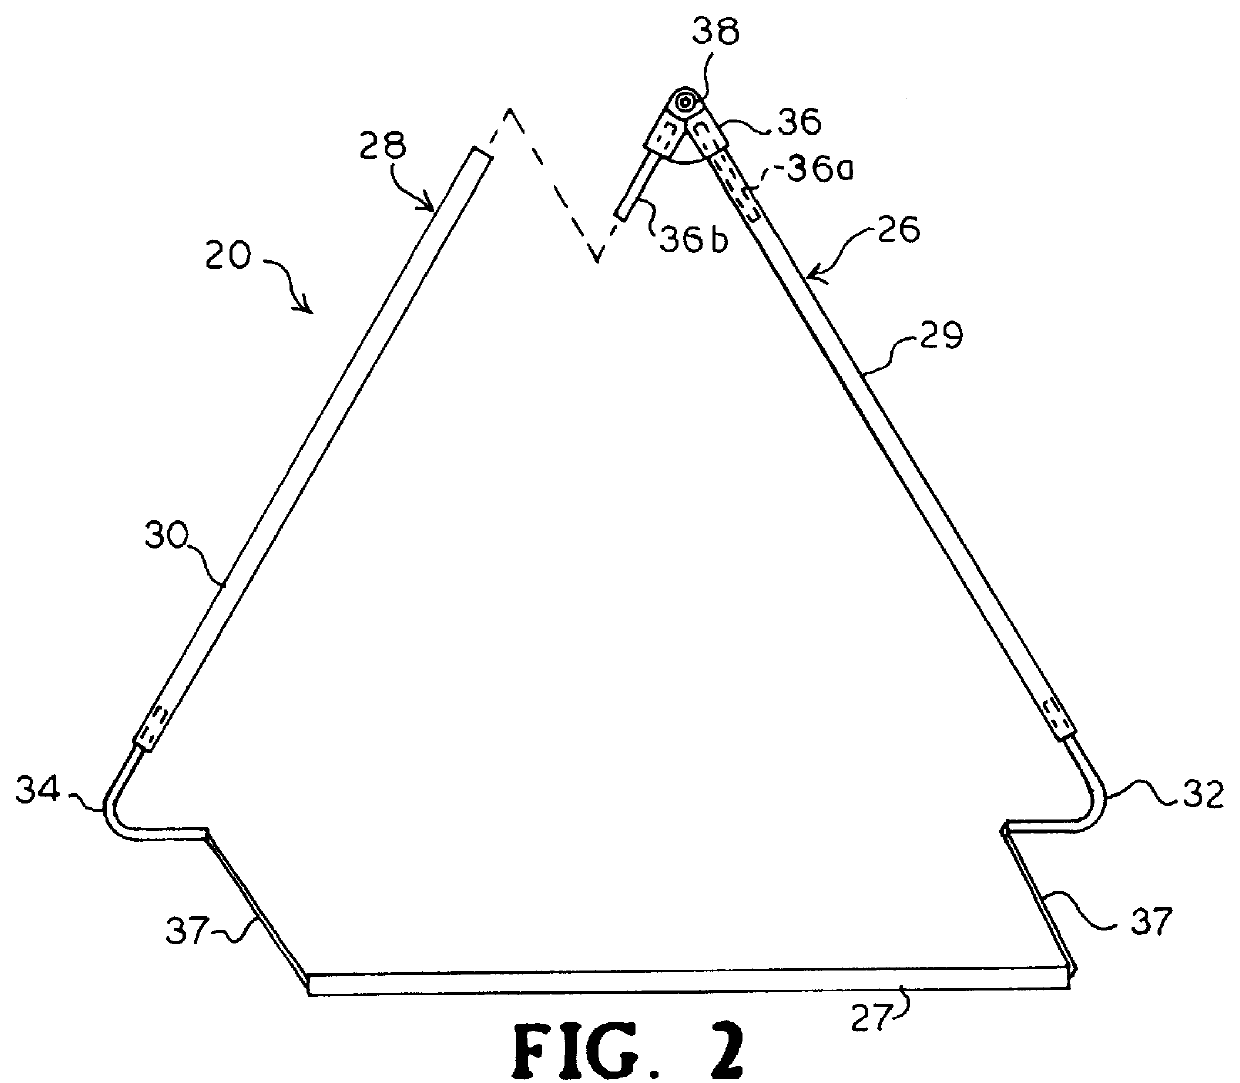 Portable mosquito net apparatus and method of securing to a bed